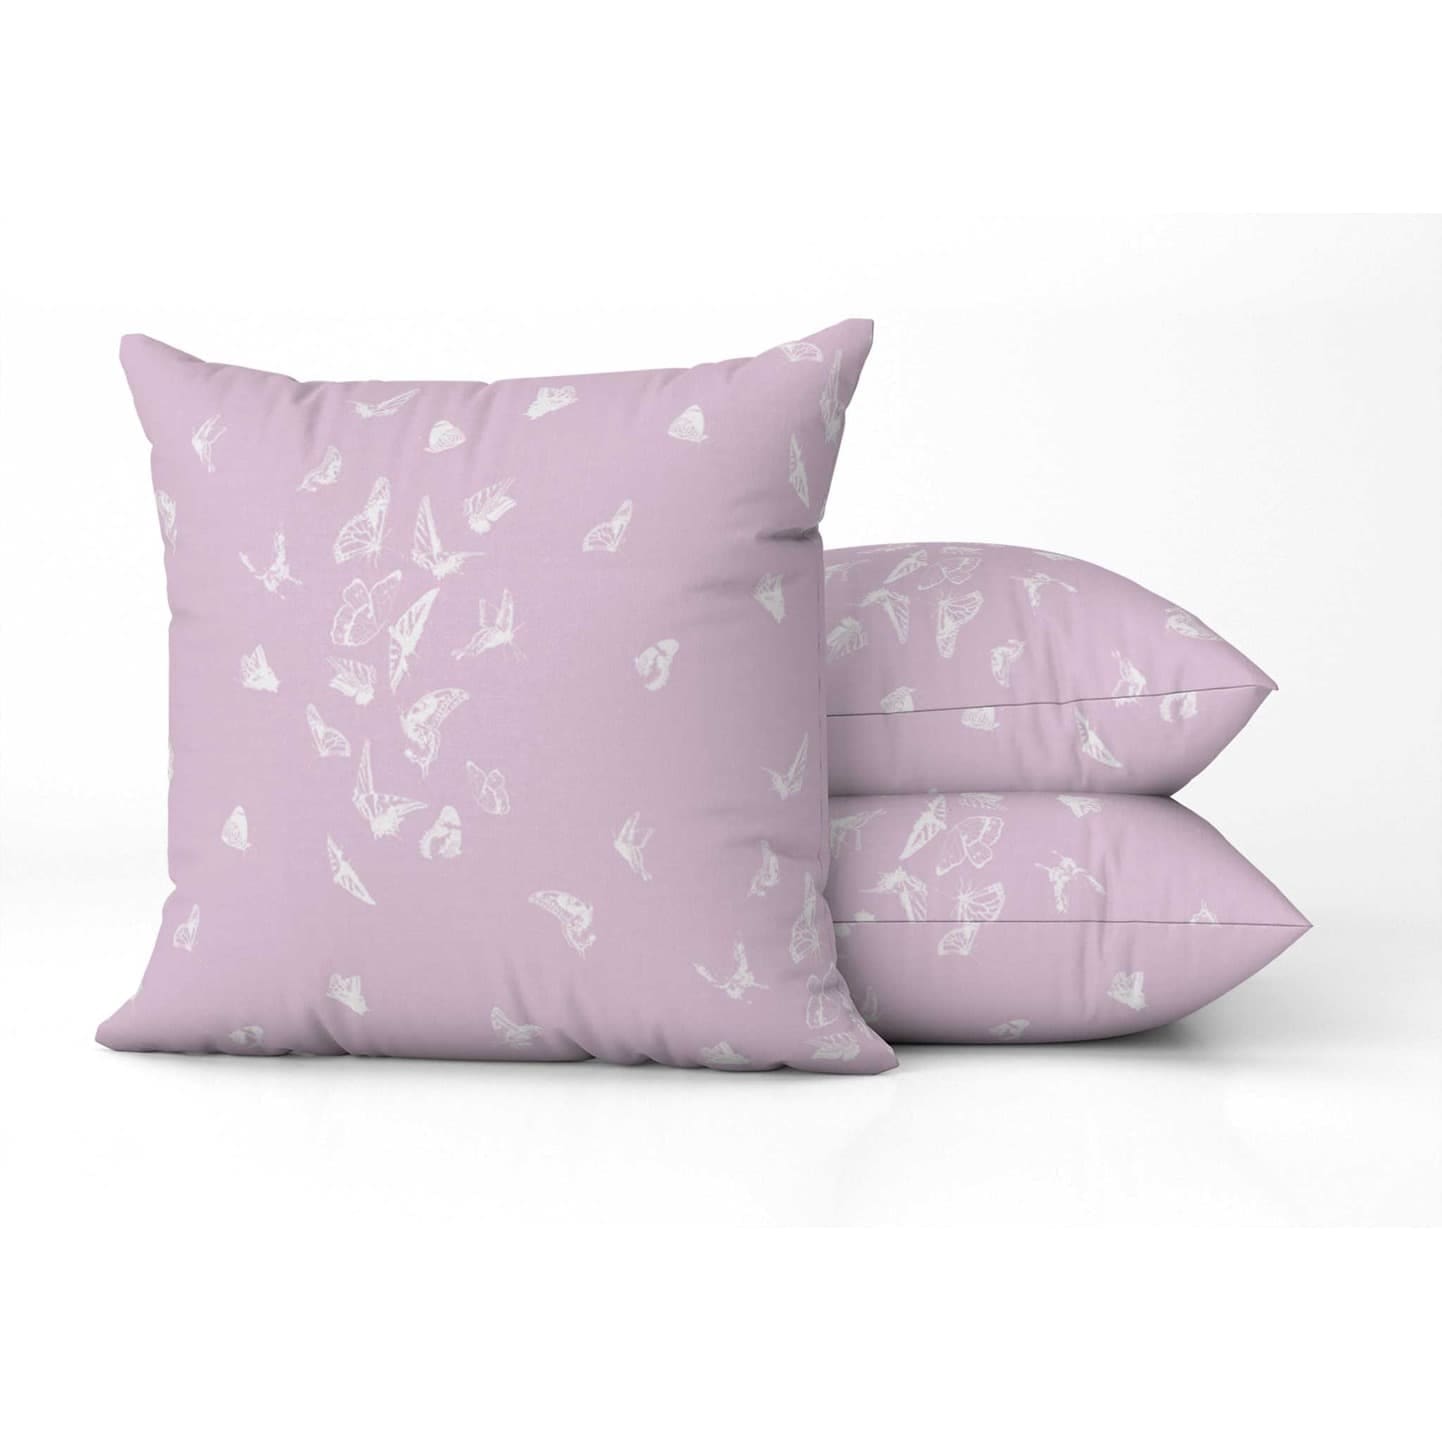 Butterfly Dance Reverse Square Pillow in Indigo